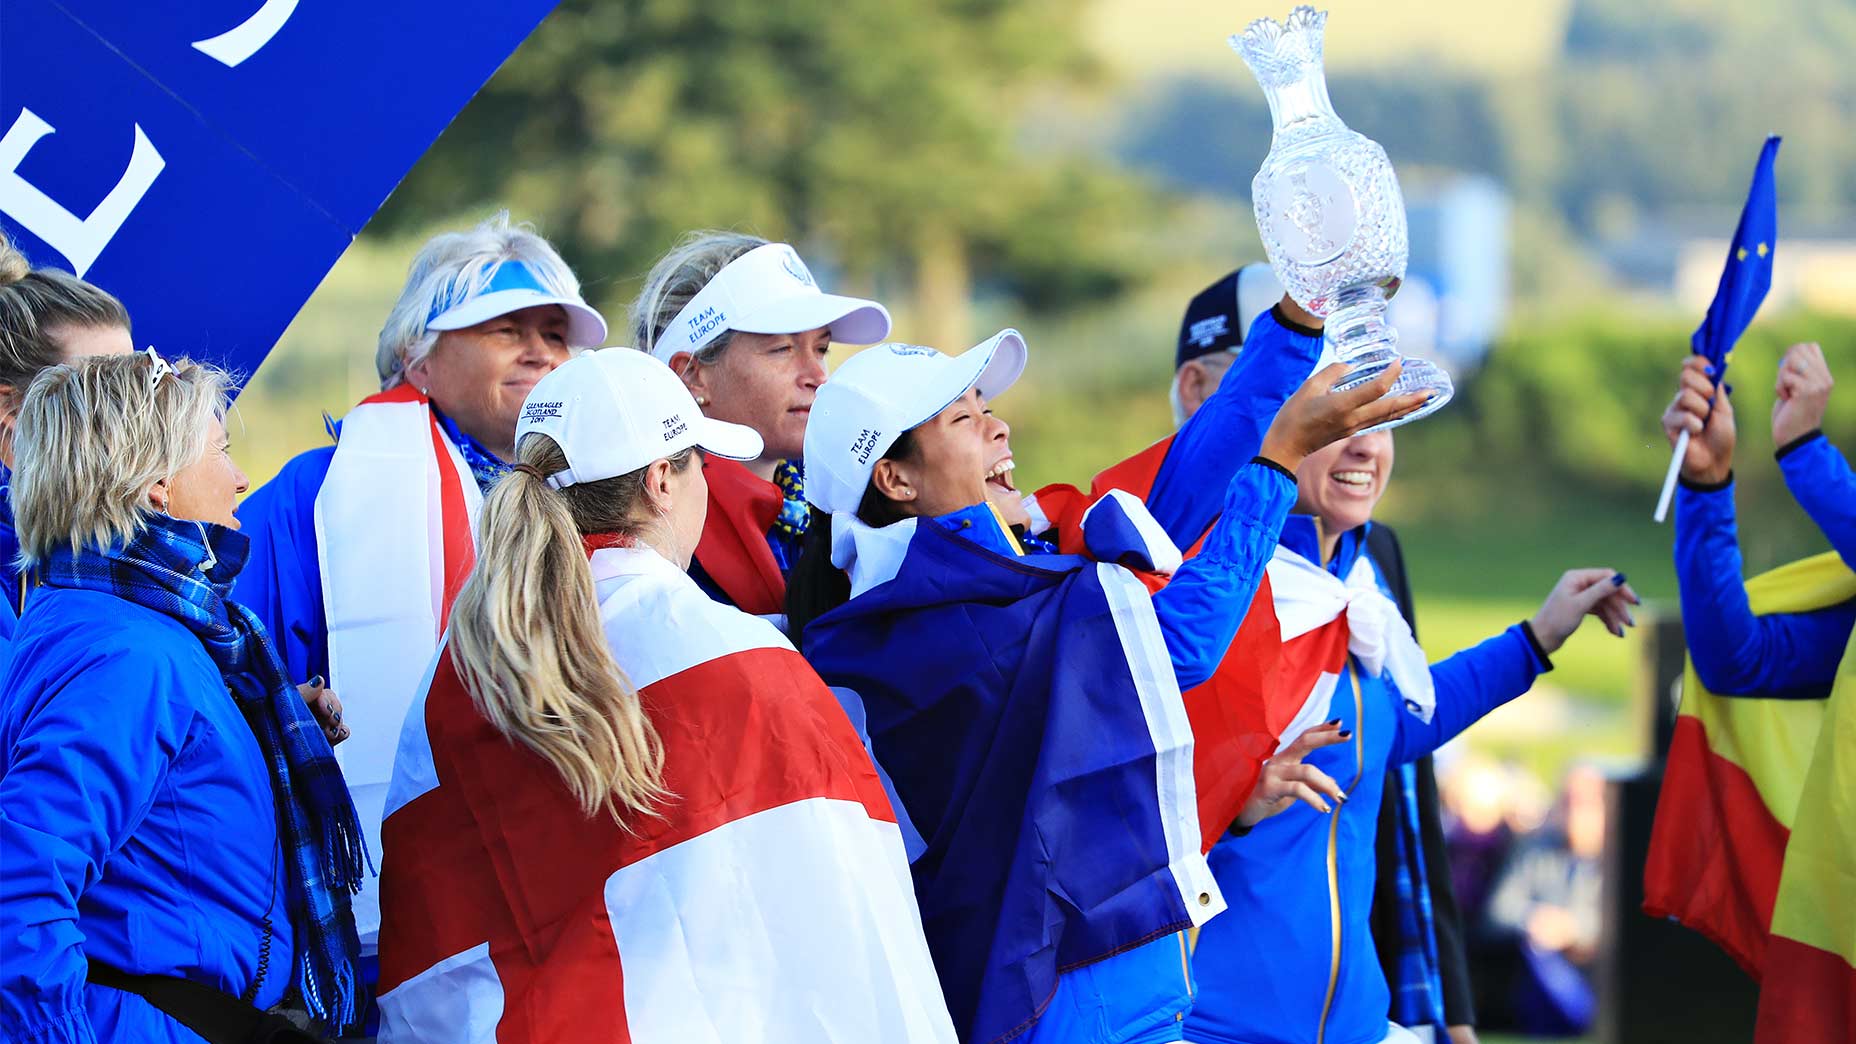 Case Study: The 2021 Solheim Cup Kick-Off Event